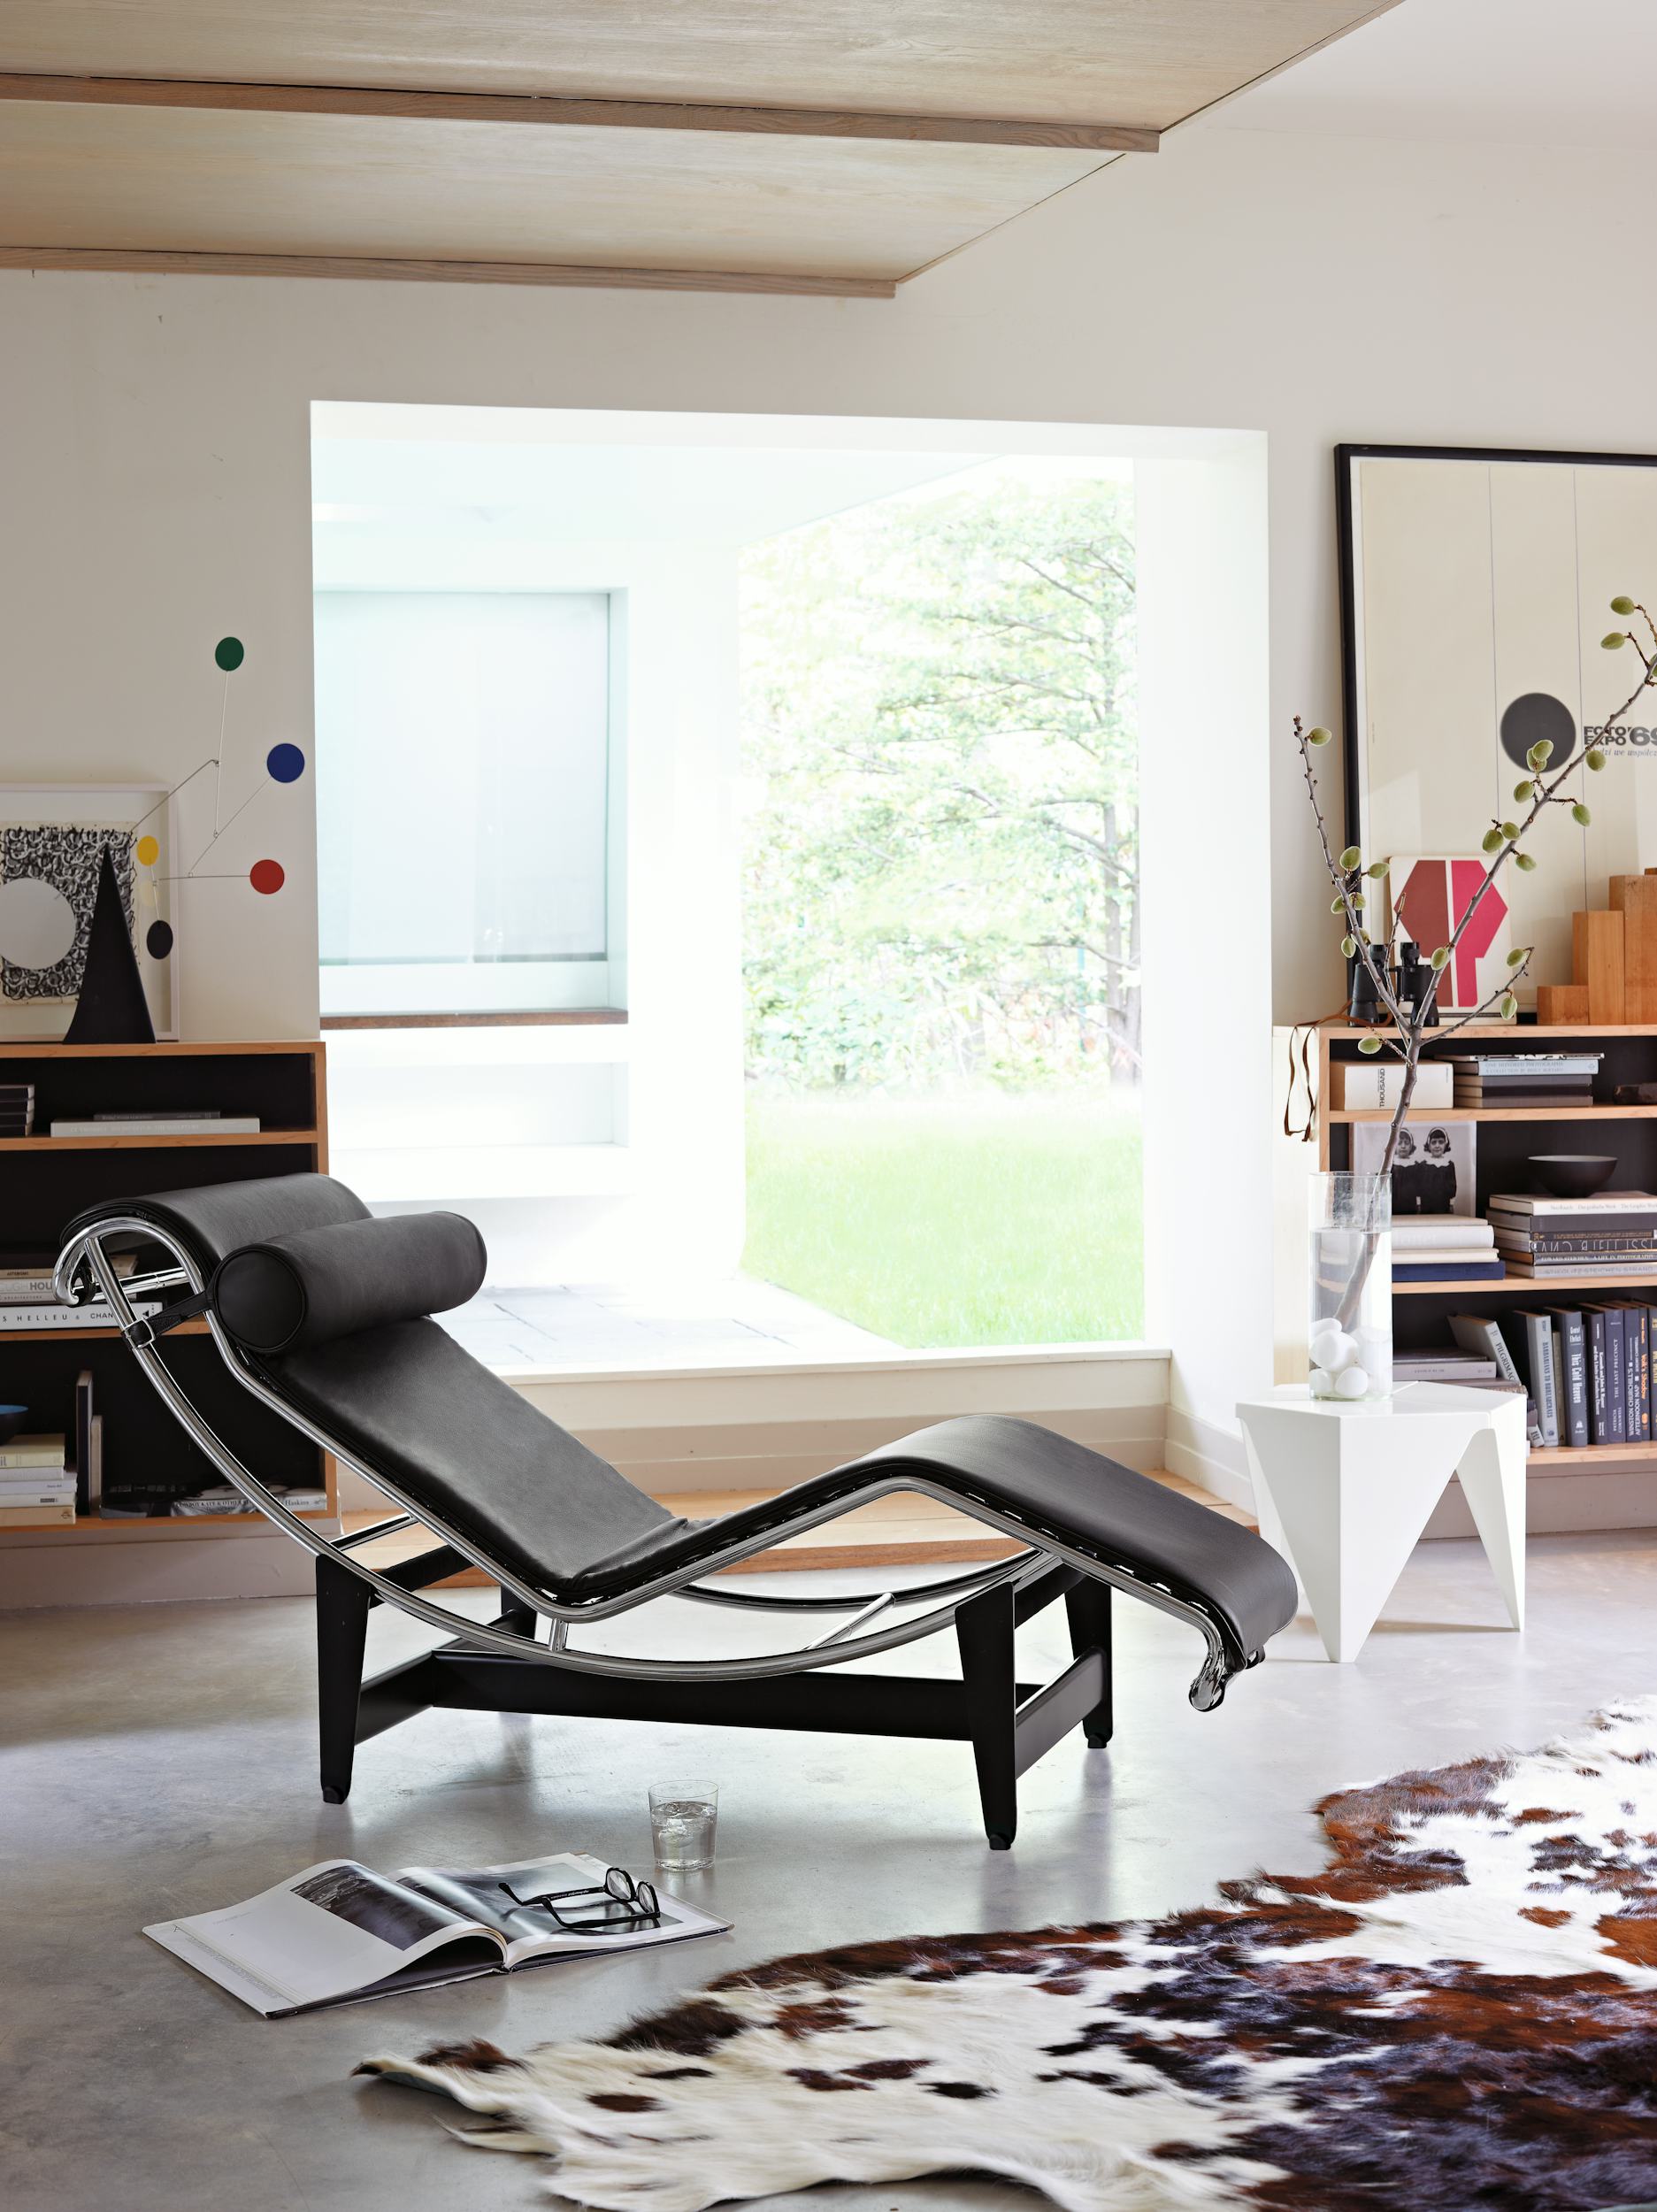 The LC4 chaise longue by Le Corbusier